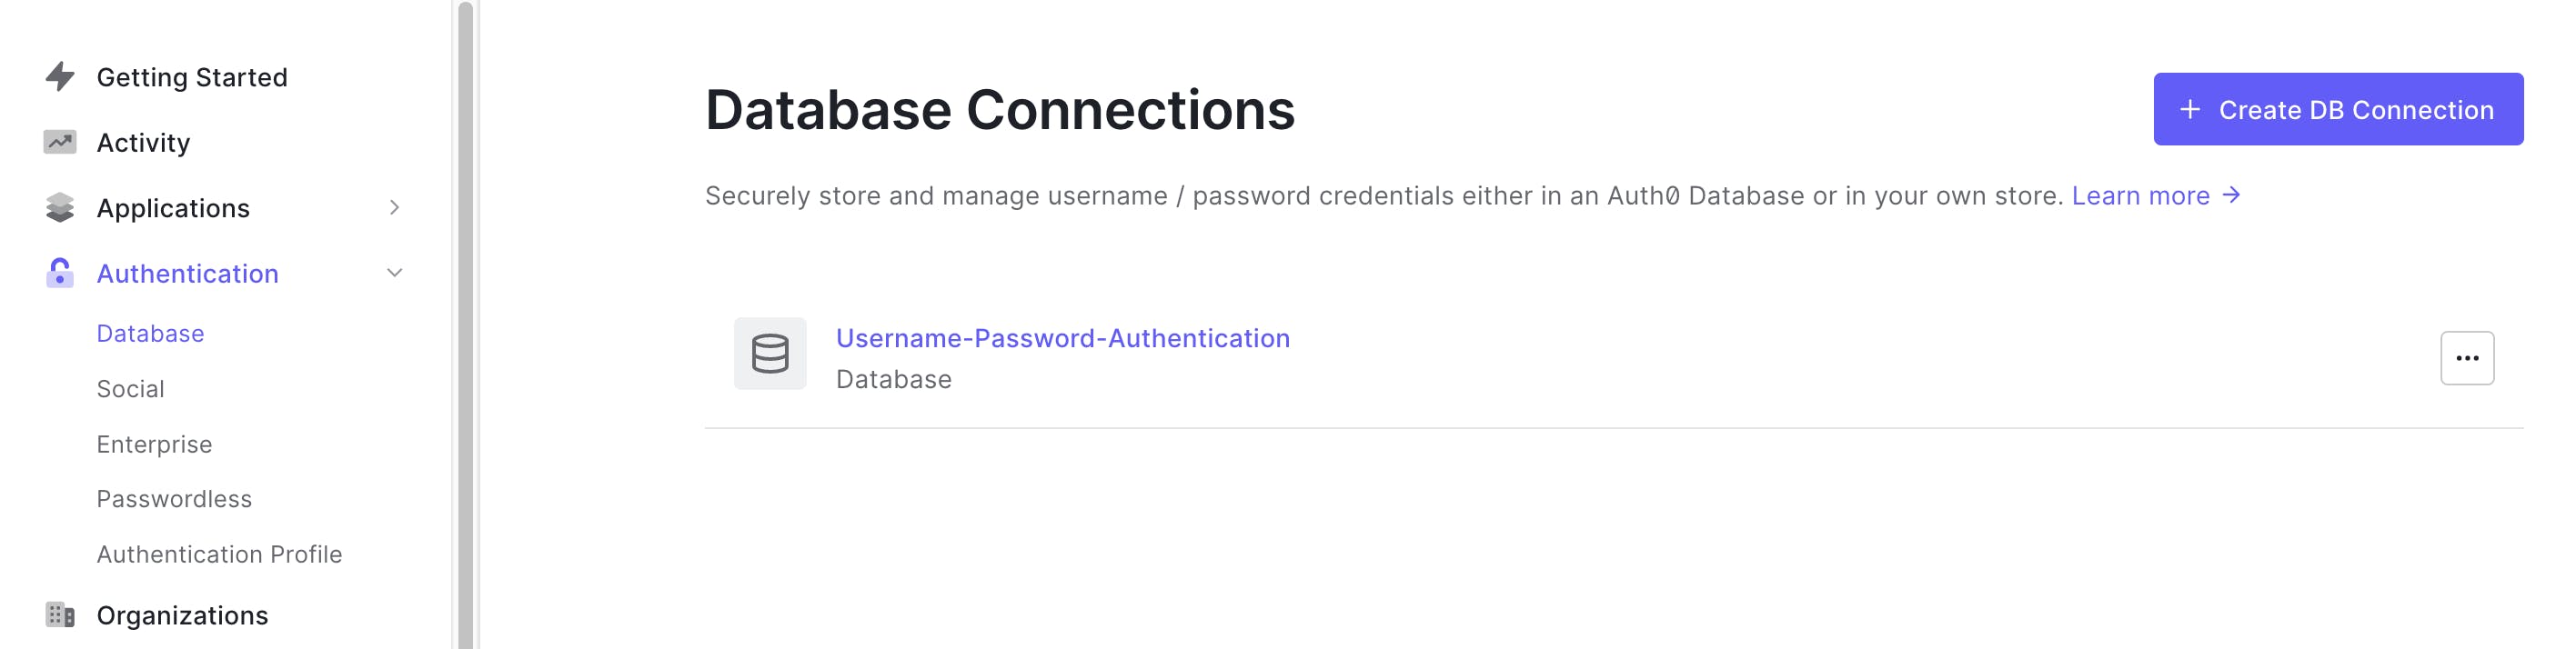 Screenshot of the Database Connections page on Auth0